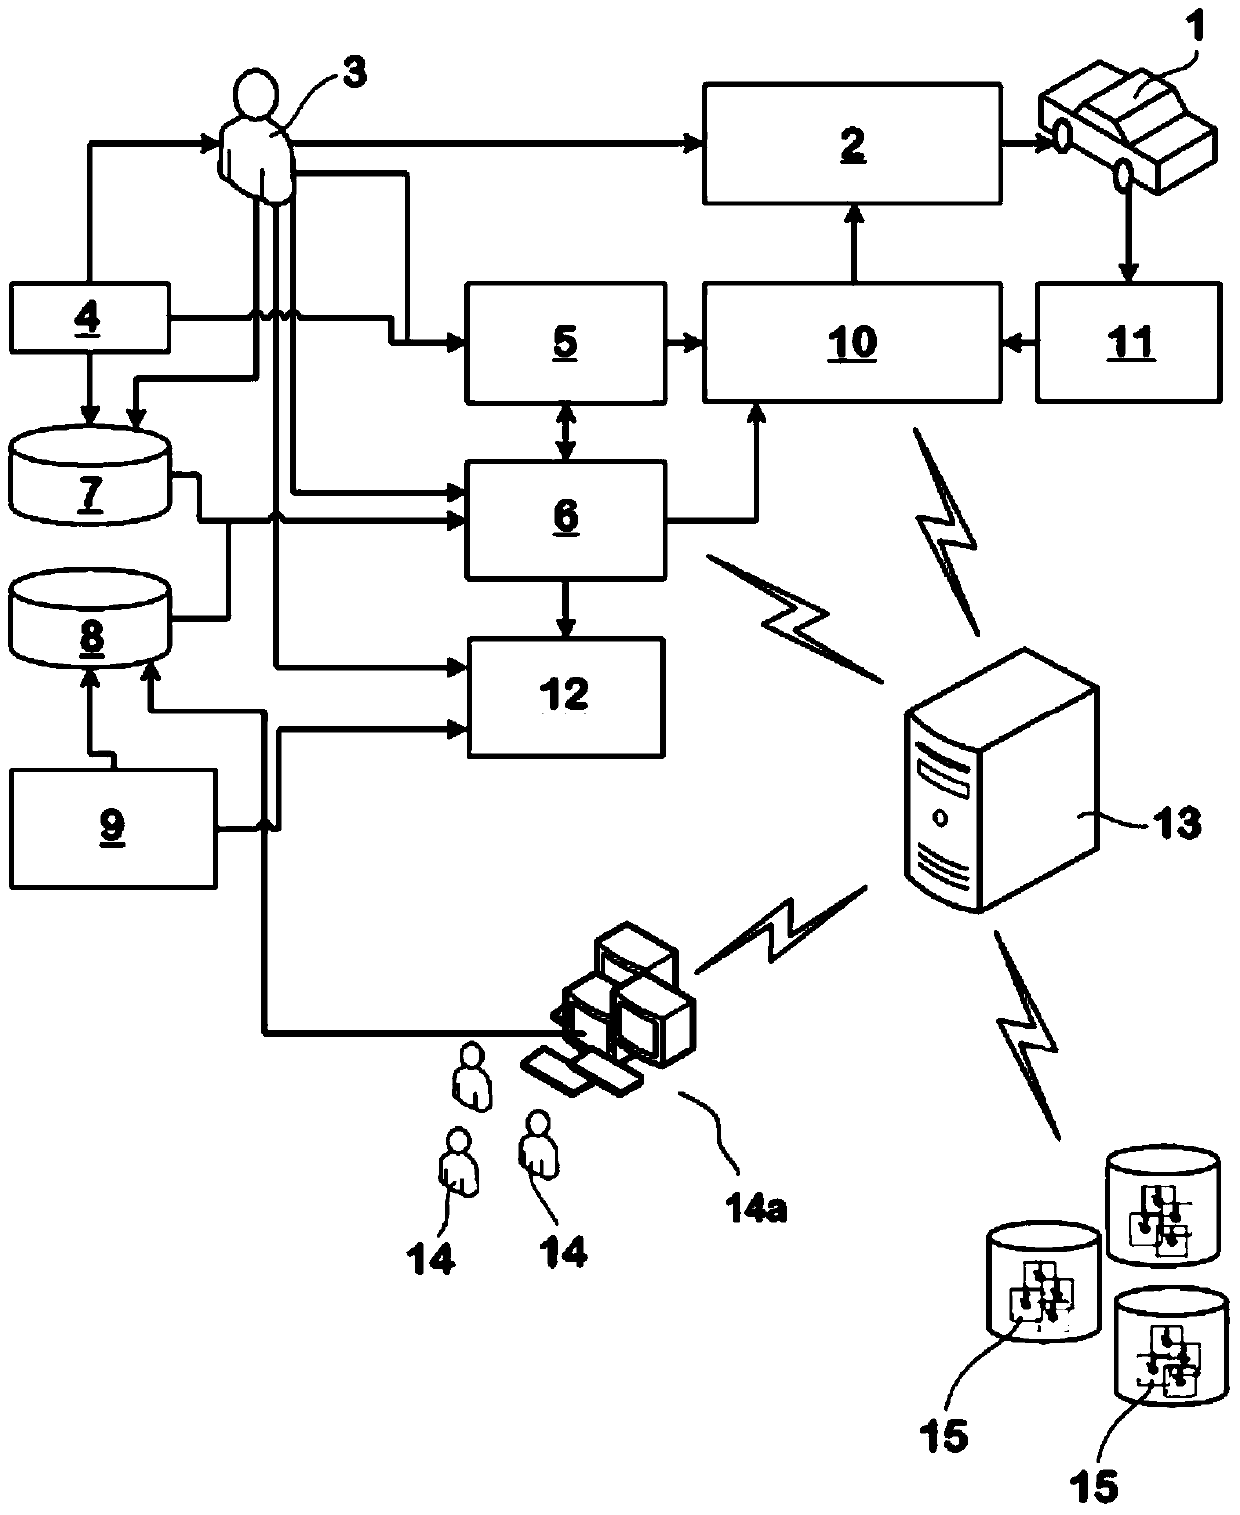 Instruction-activated remote control system for motor vehicles